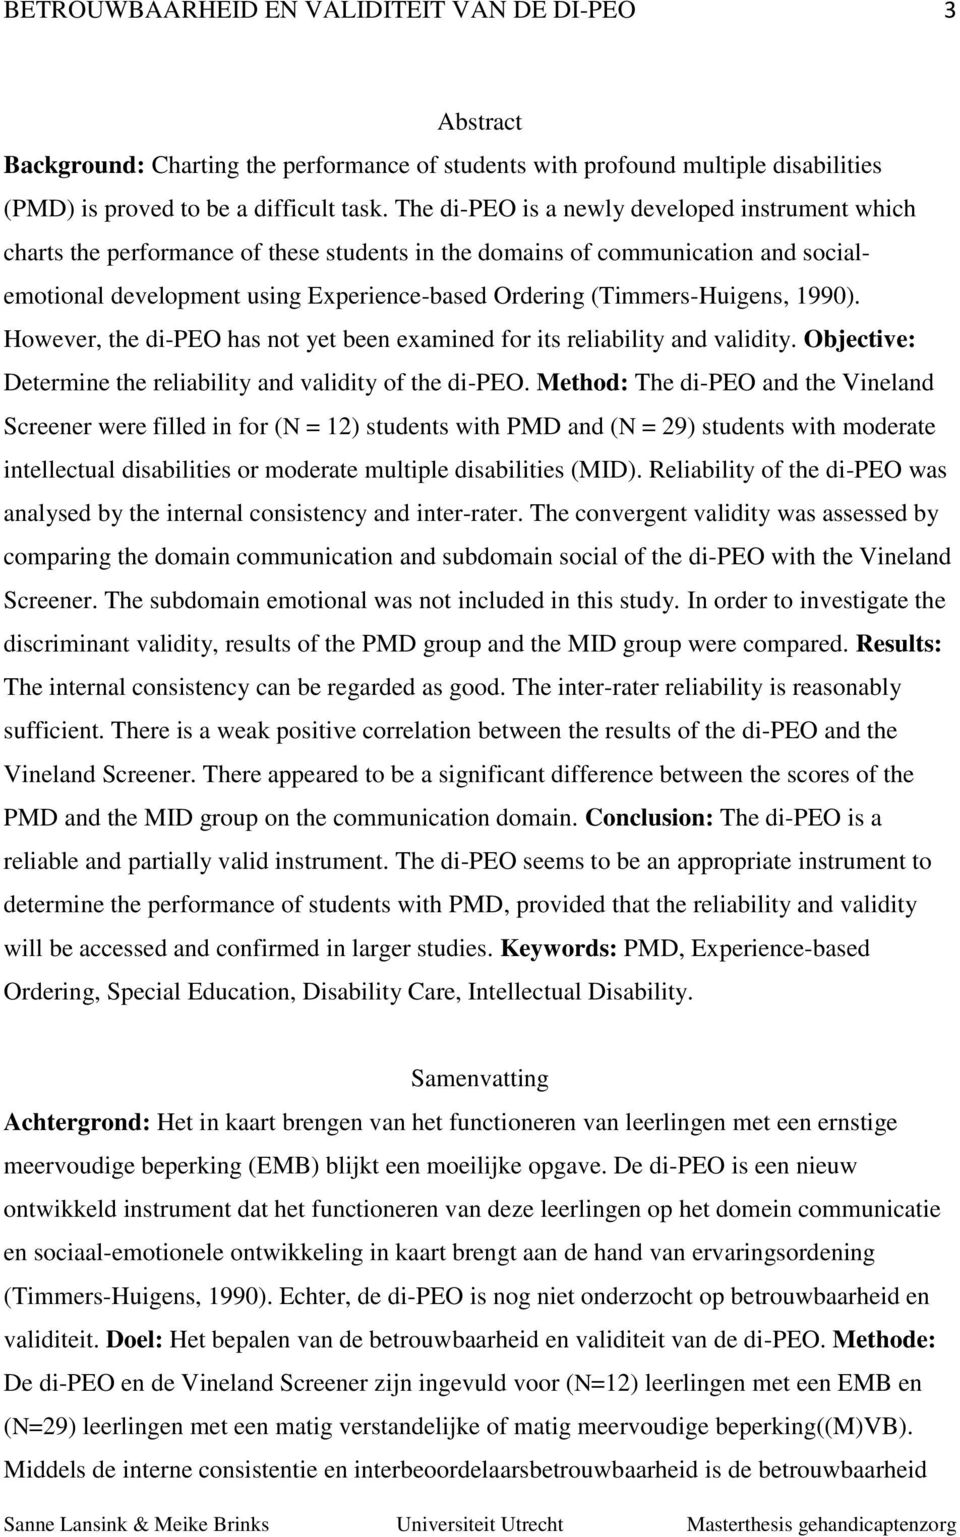 (Timmers-Huigens, 1990). However, the di-peo has not yet been examined for its reliability and validity. Objective: Determine the reliability and validity of the di-peo.